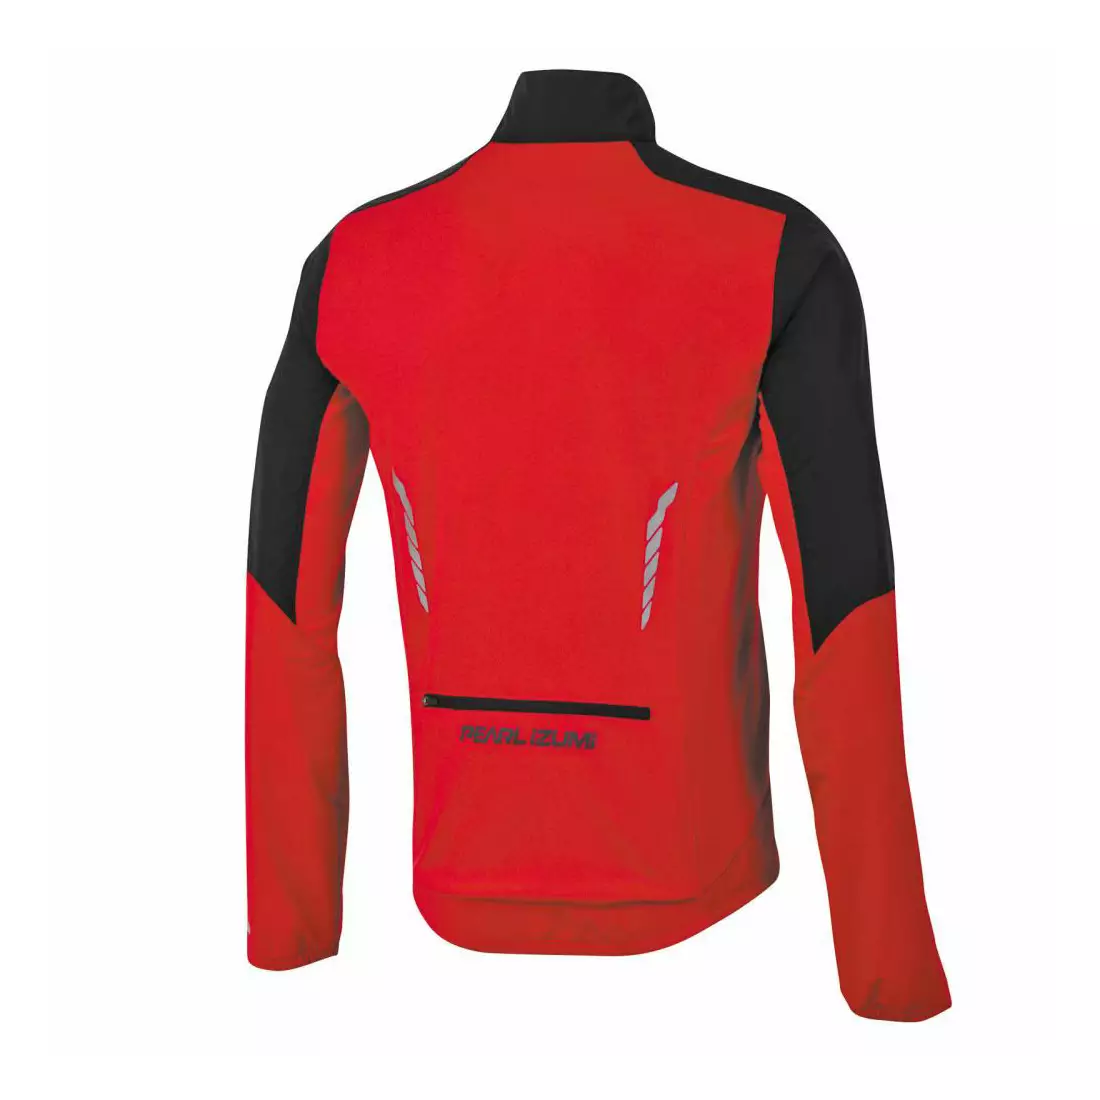 PEARL IZUMI Select Thermal Barrier 11131411-2FK - men's cycling jacket, color: black and red